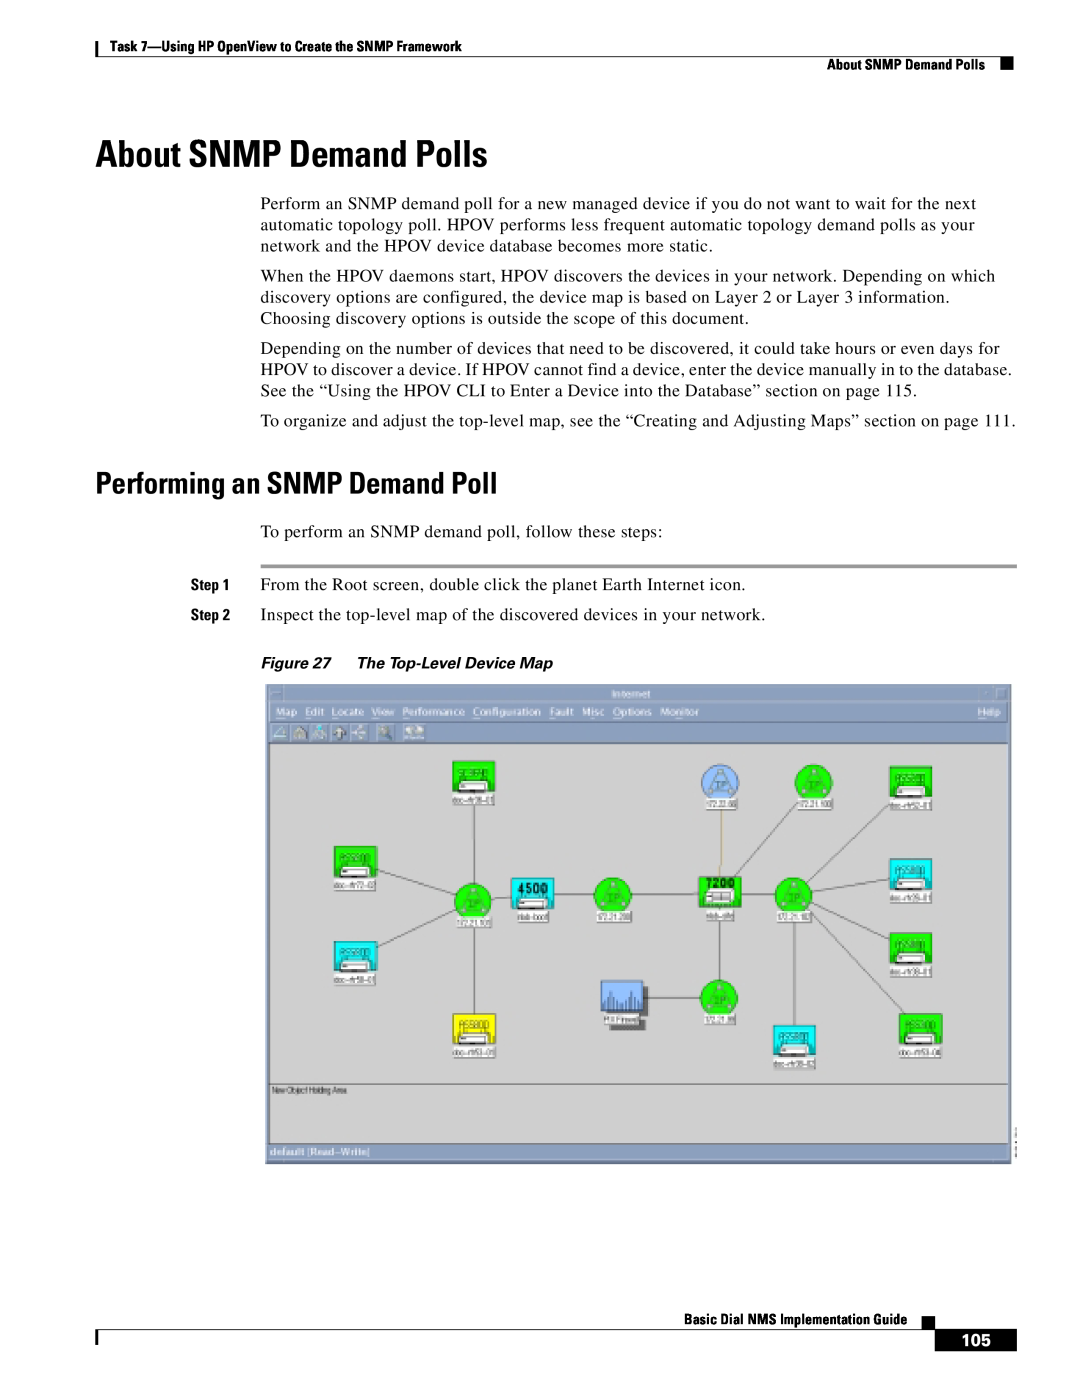 Cisco Systems Dial NMS manual About SNMP Demand Polls, Performing an SNMP Demand Poll 